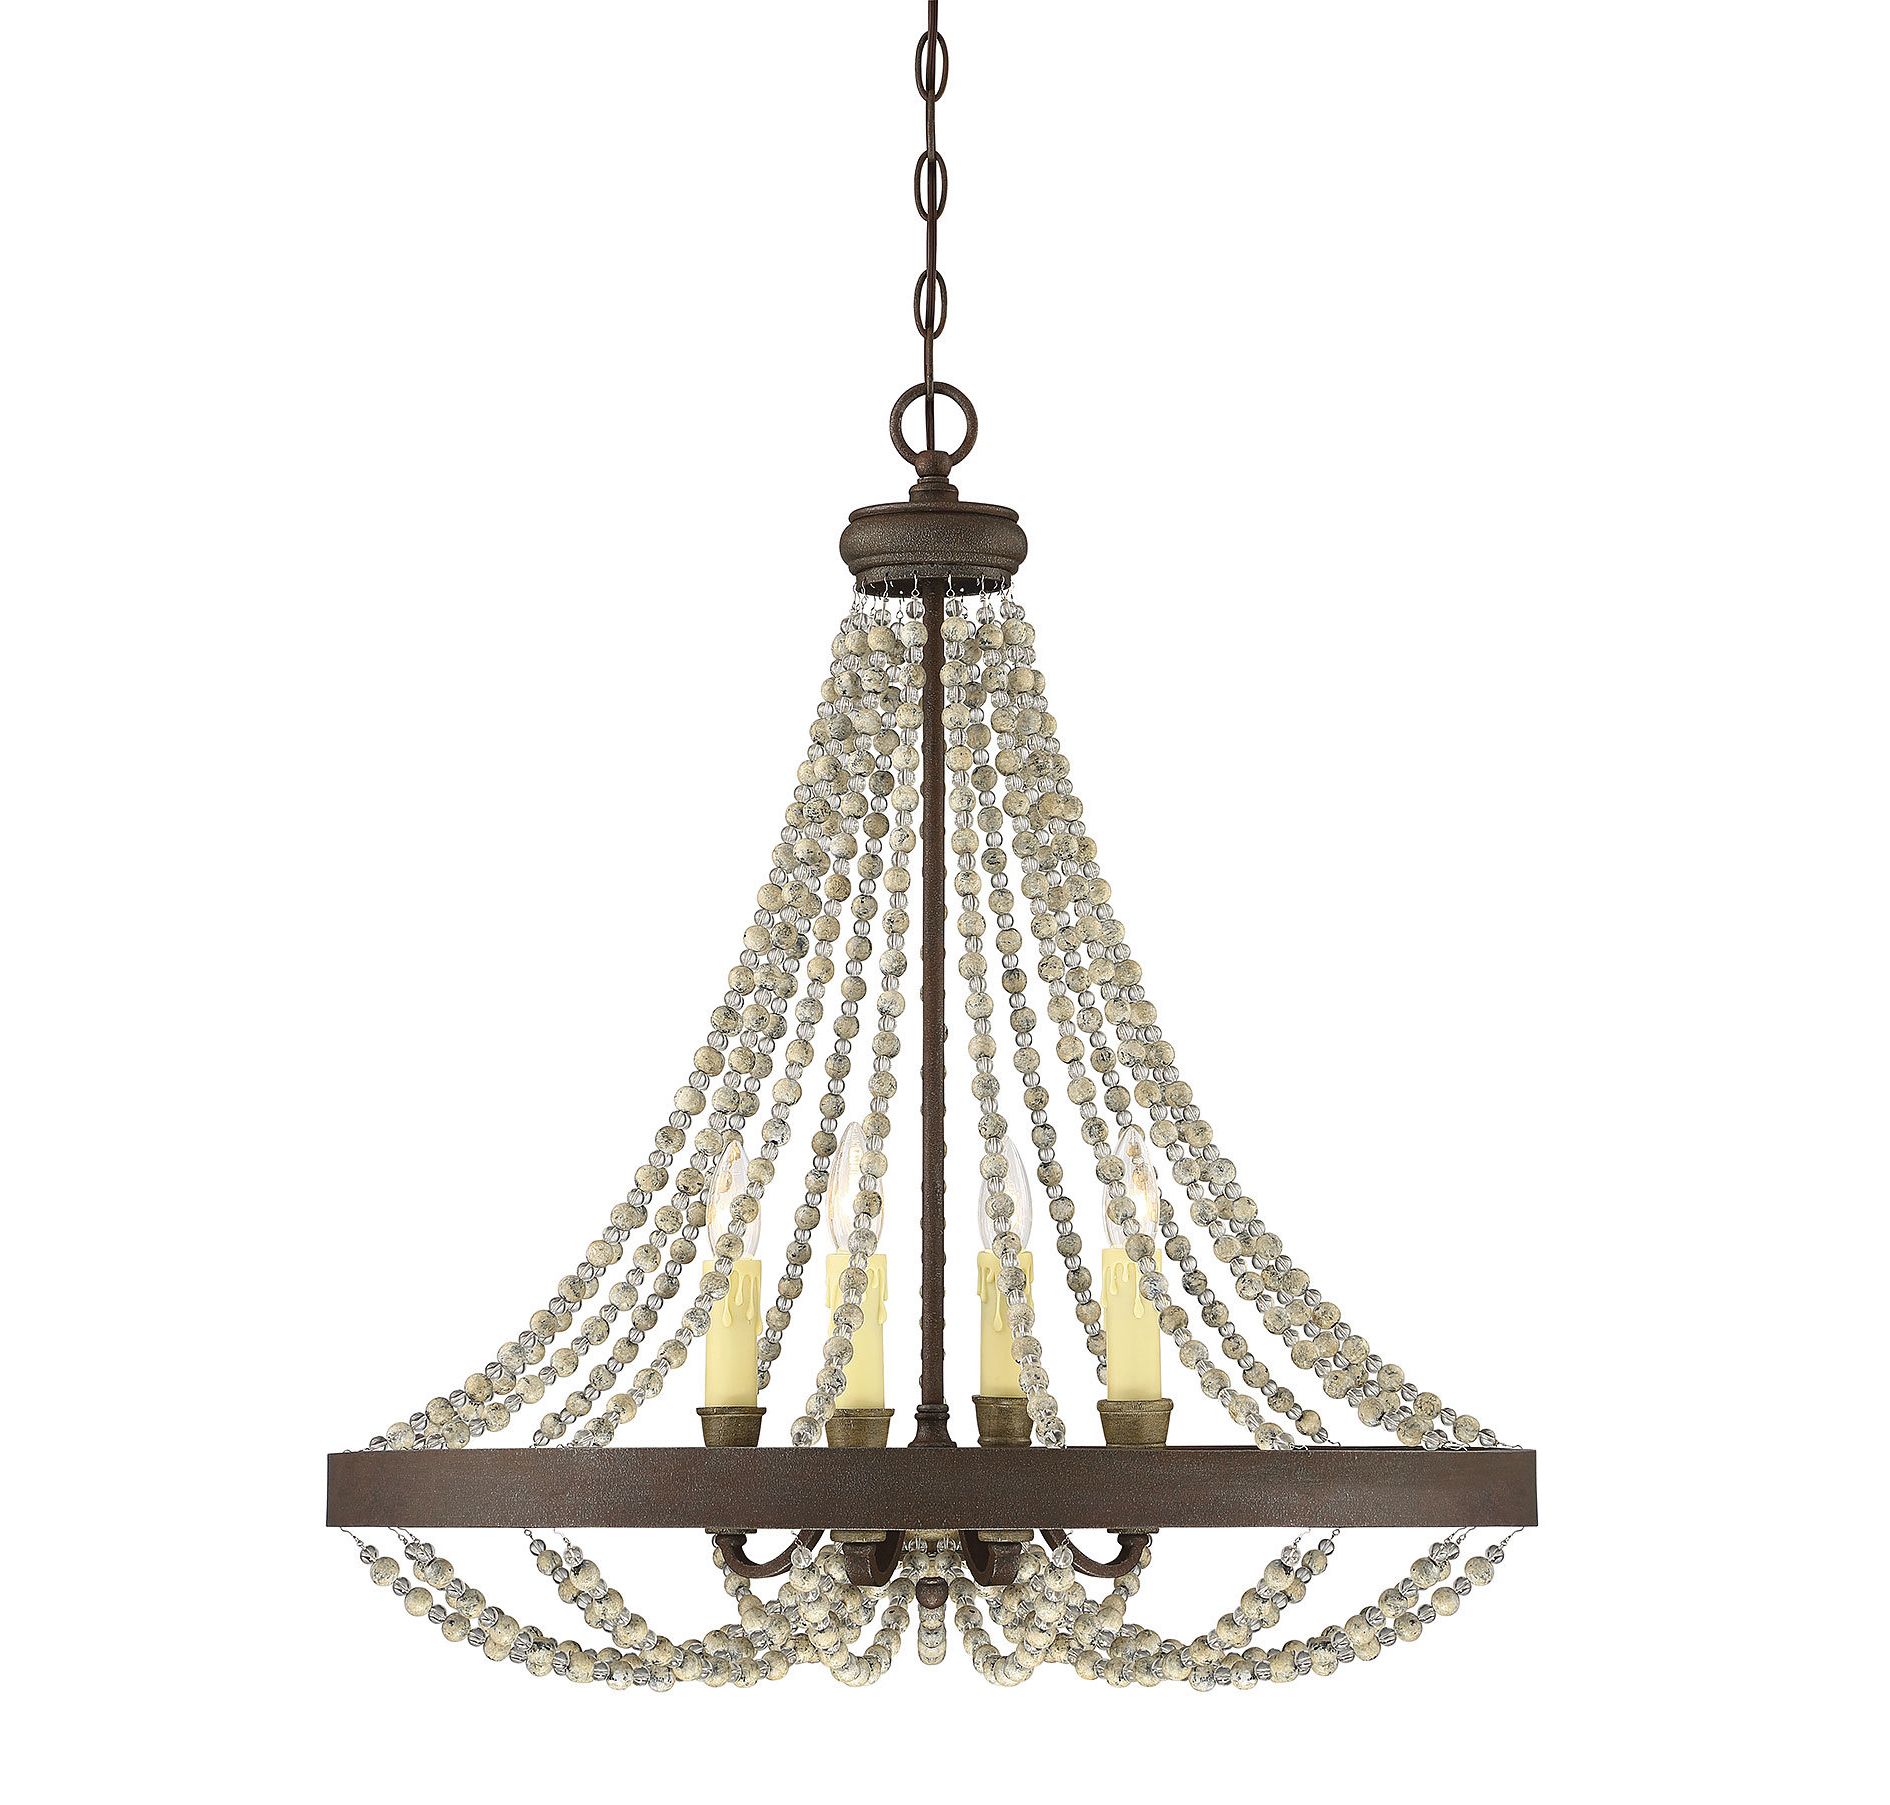 Current Artana 4 Light Candle Style Chandelier In Whitten 4 Light Crystal Chandeliers (View 24 of 25)